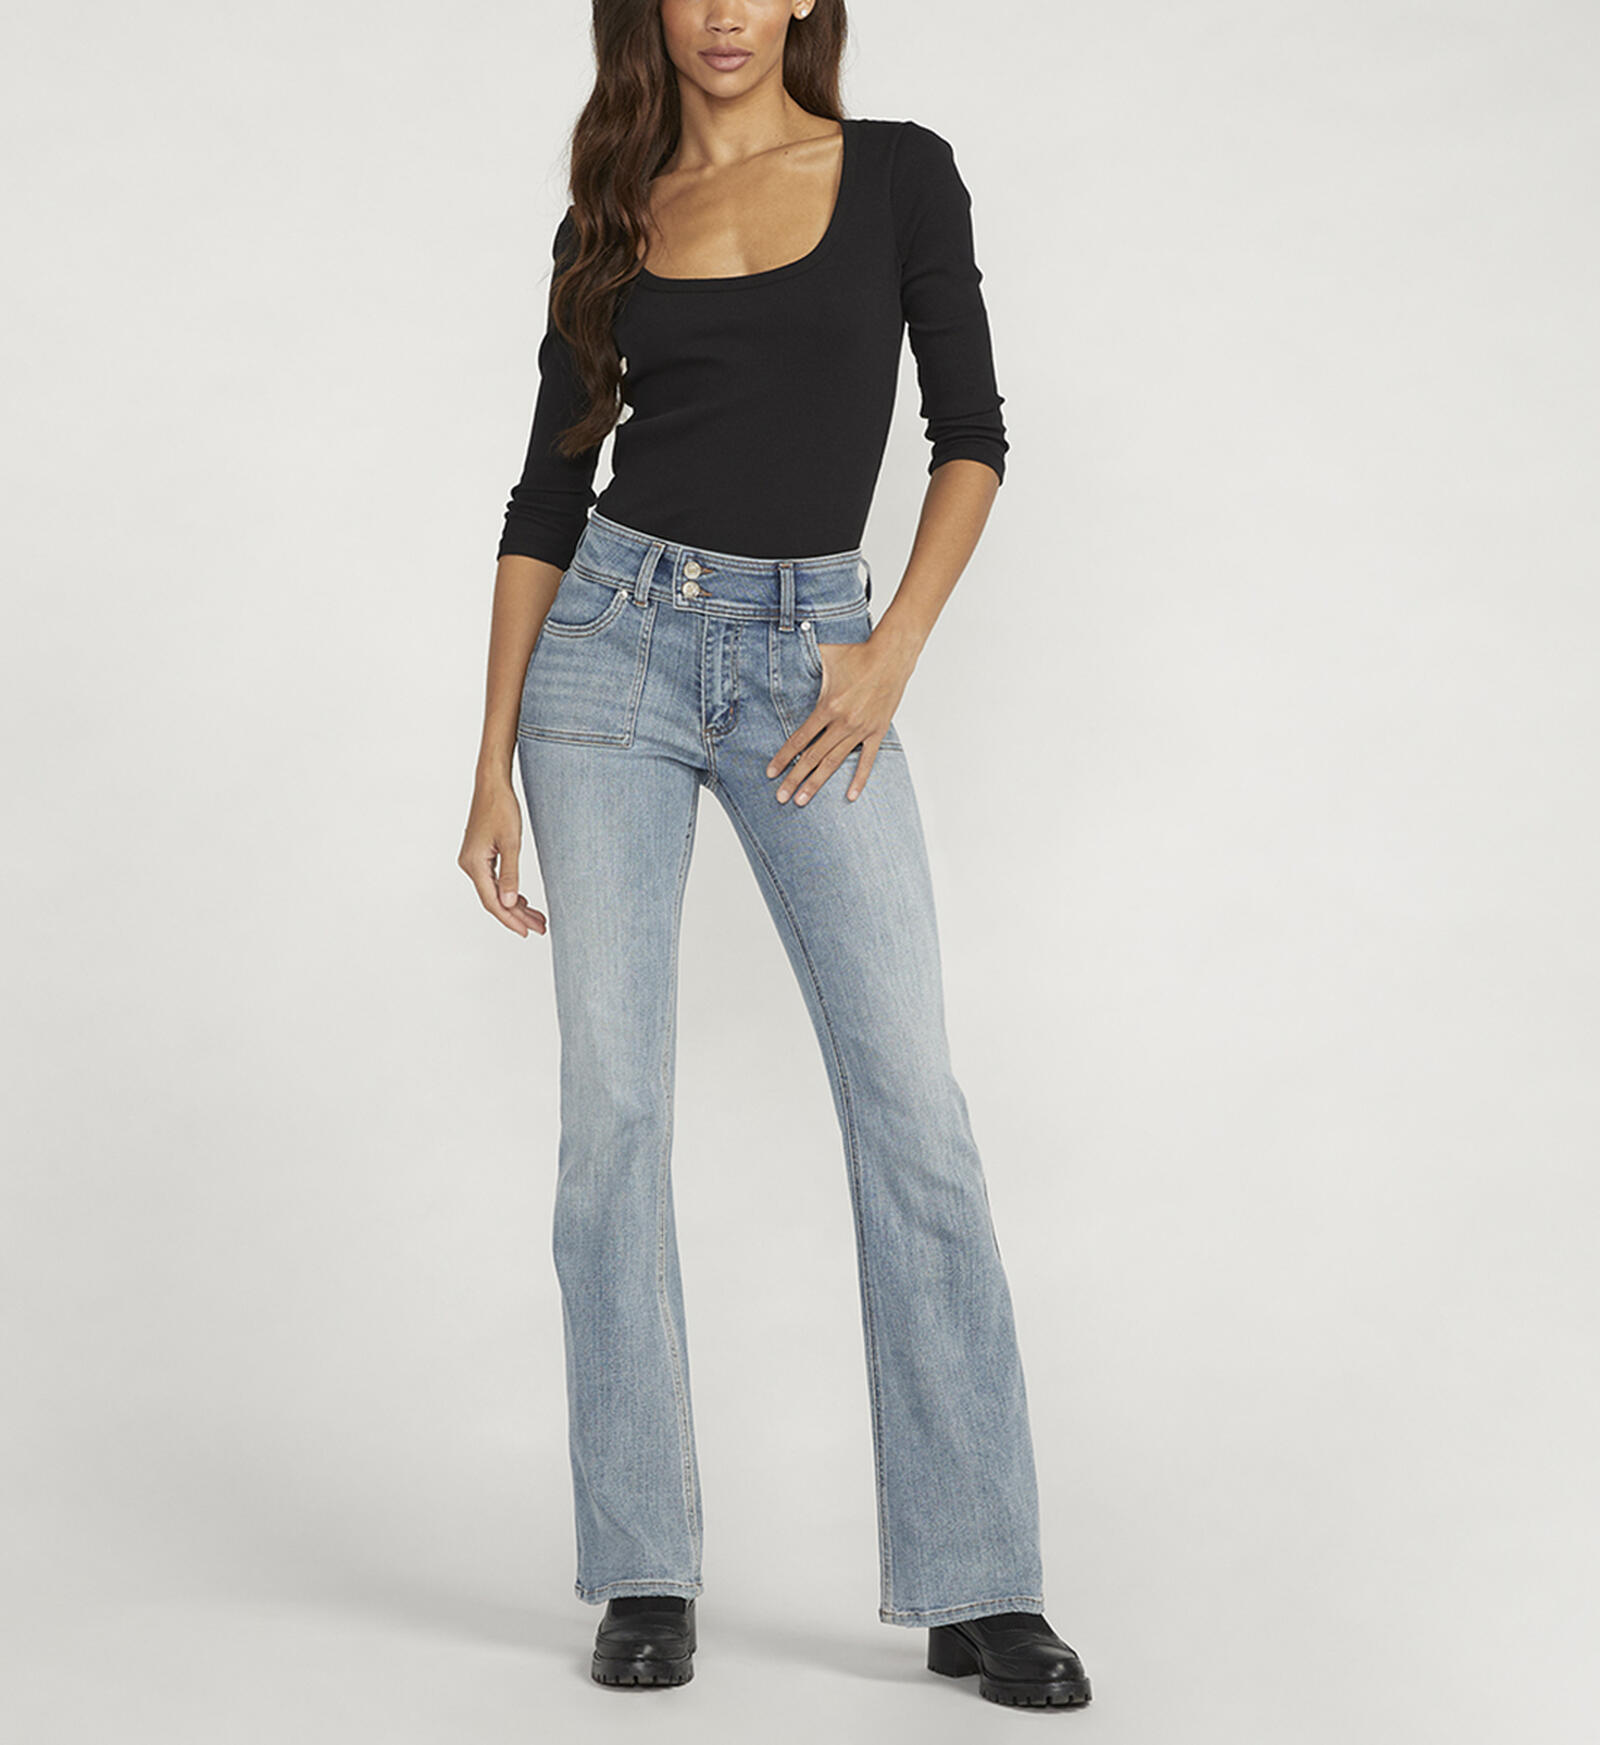 Jeans flare low waist